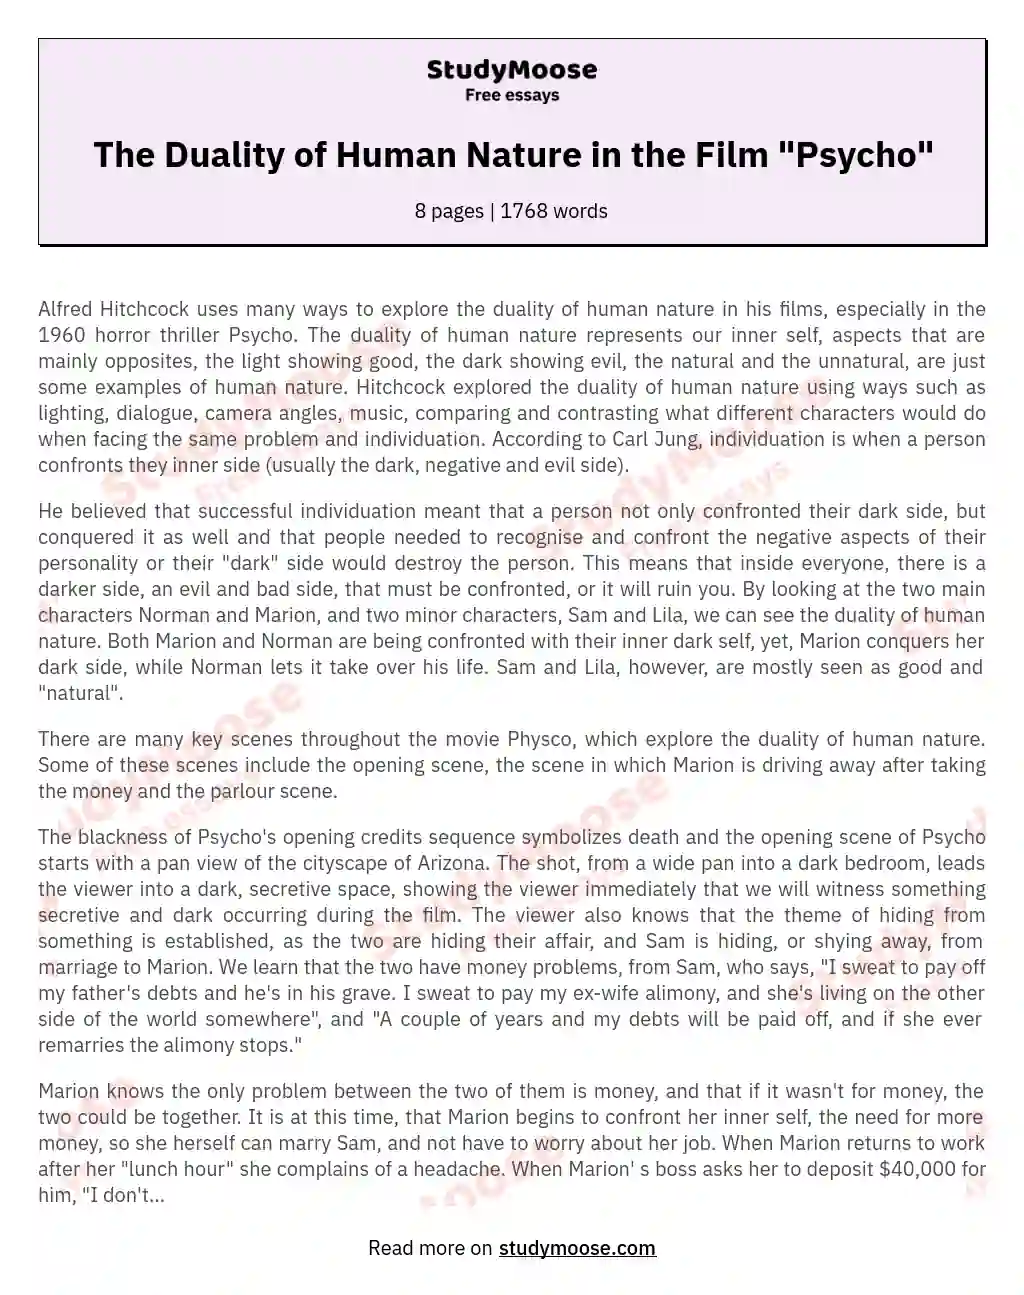 The Duality of Human Nature in the Film "Psycho" essay